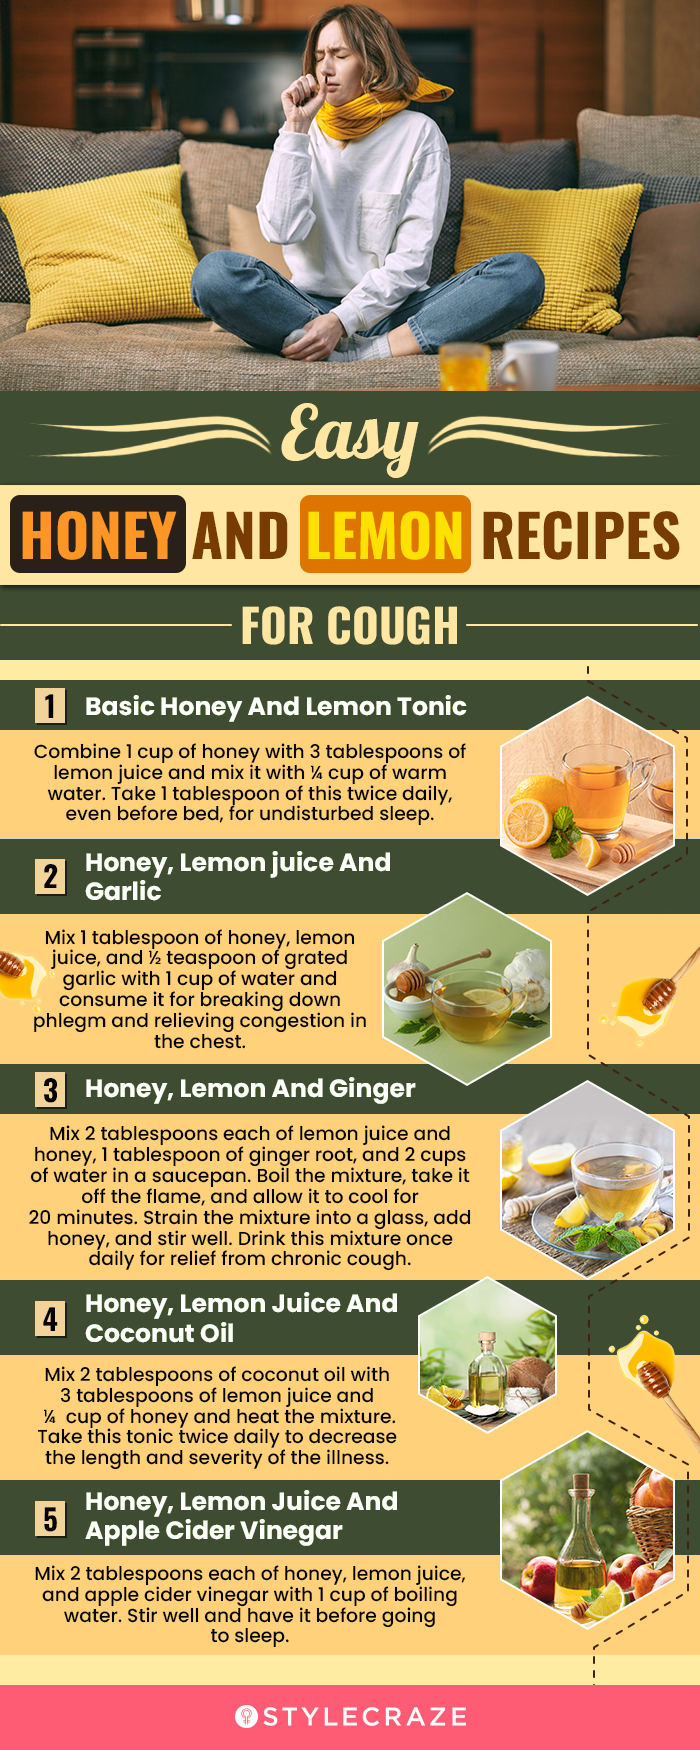 easy honey and lemon recipes for cough (infographic)